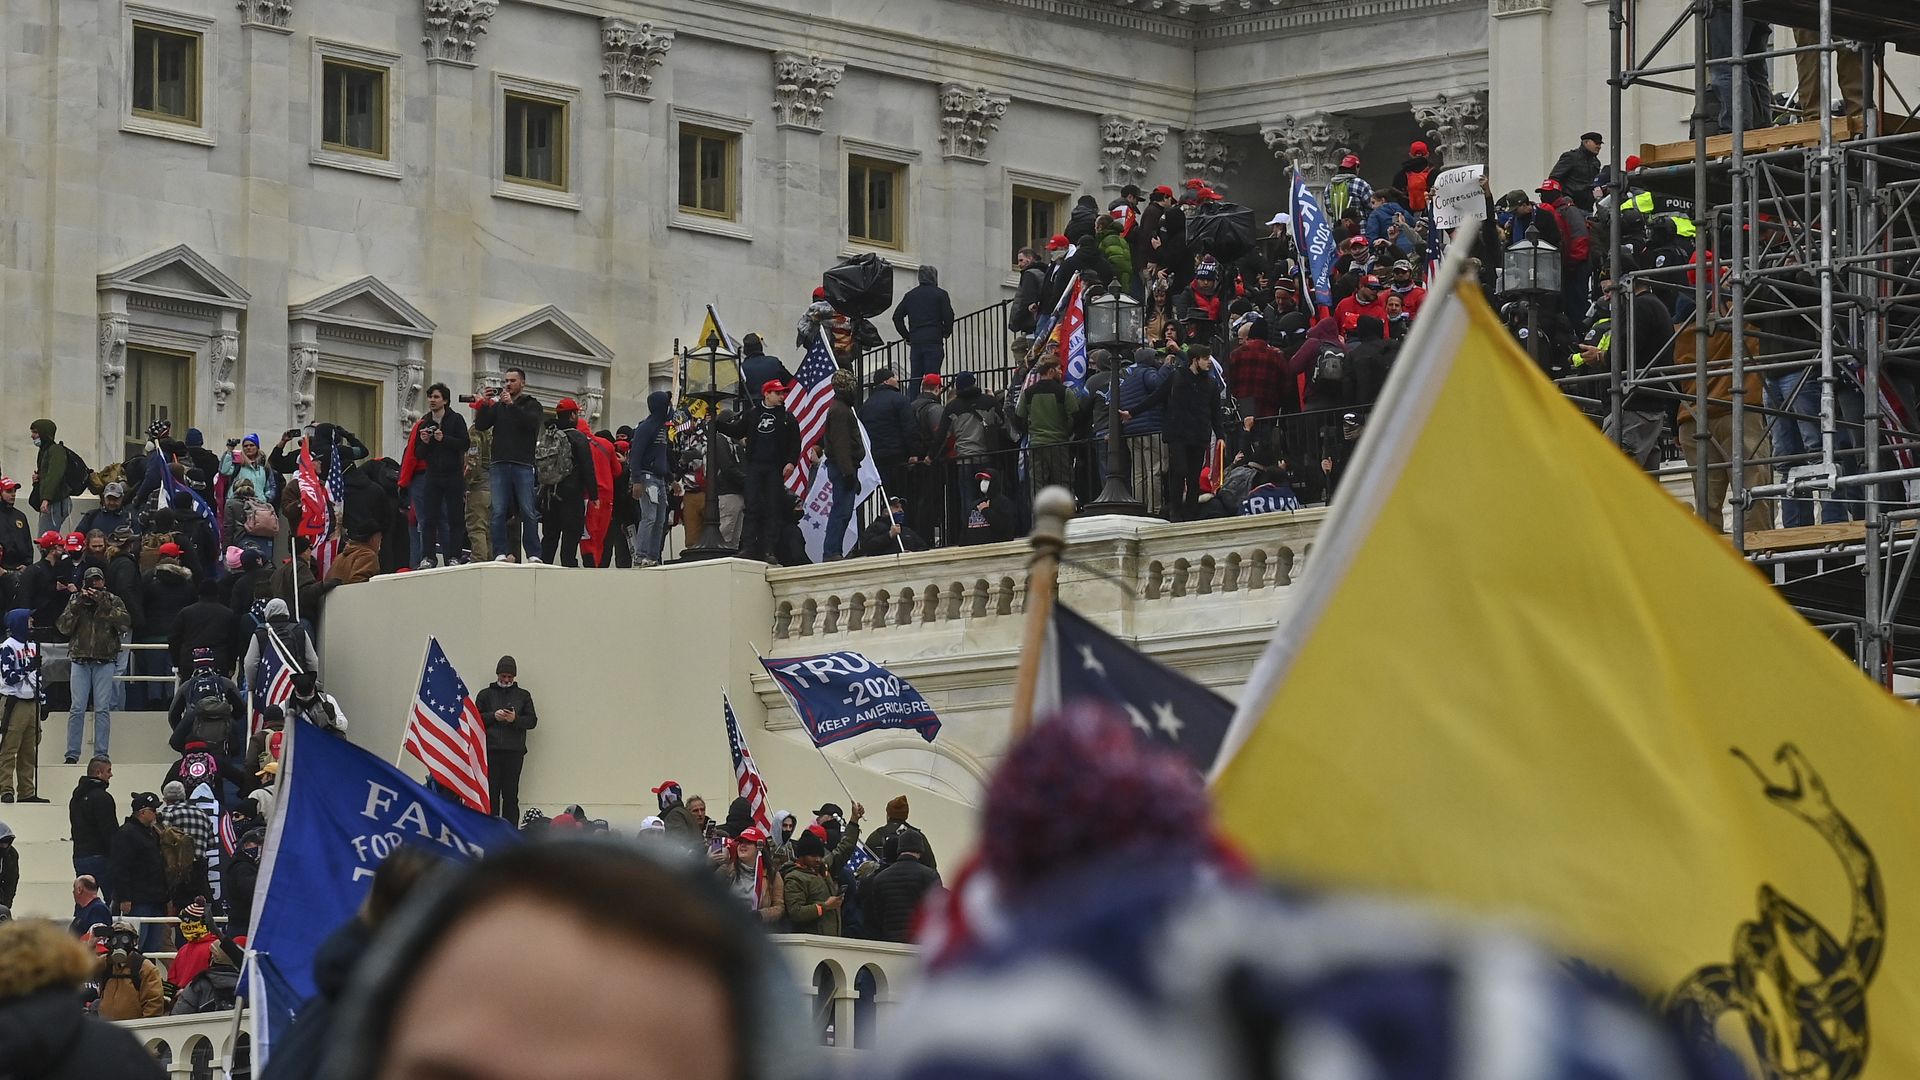 Picture of the Capitol stairs with protesters invading